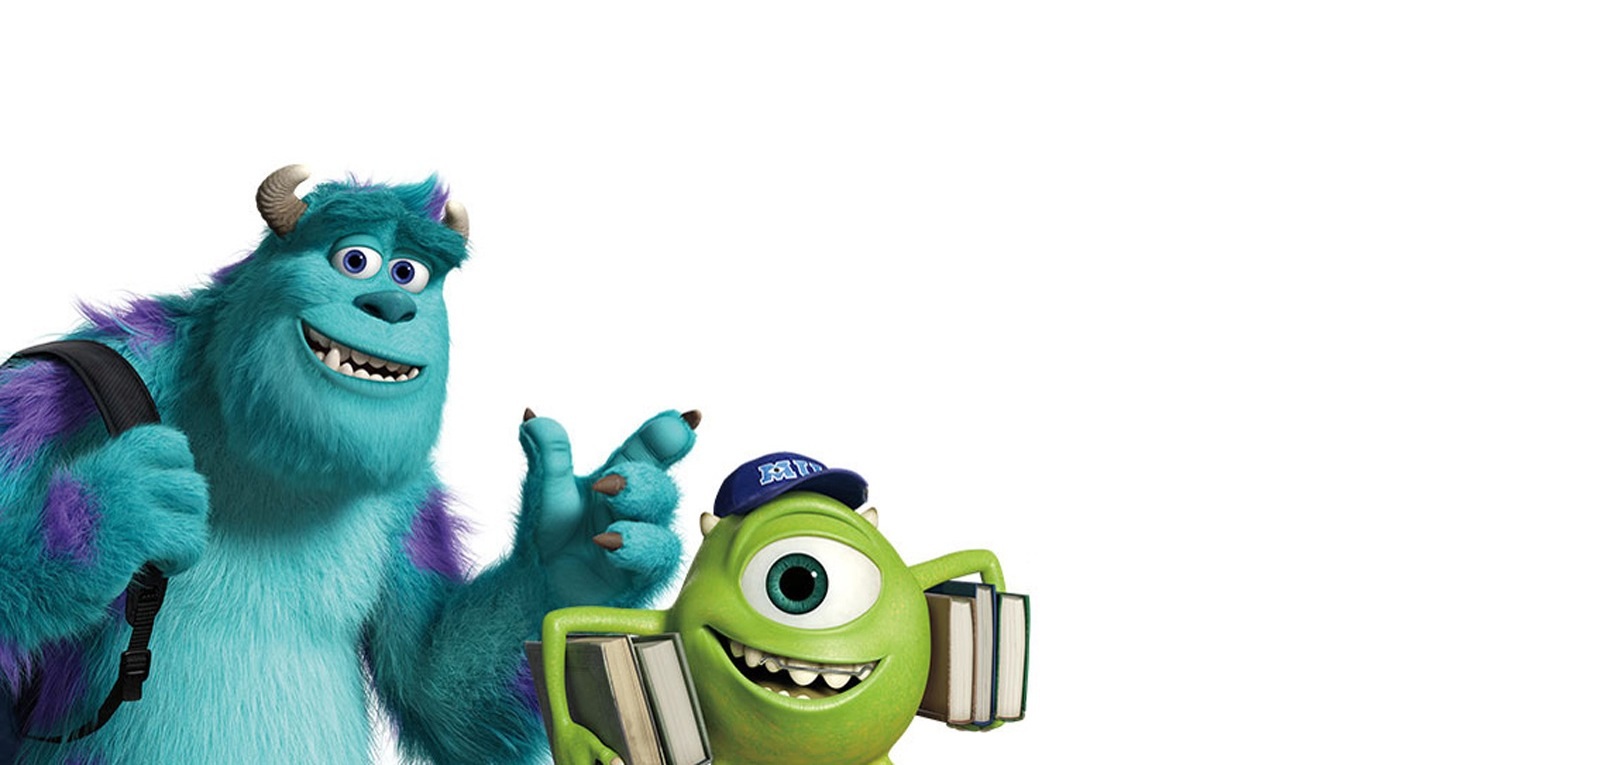 Monsters University Blu-Ray SteelBook will be hitting stores in time for school to start.